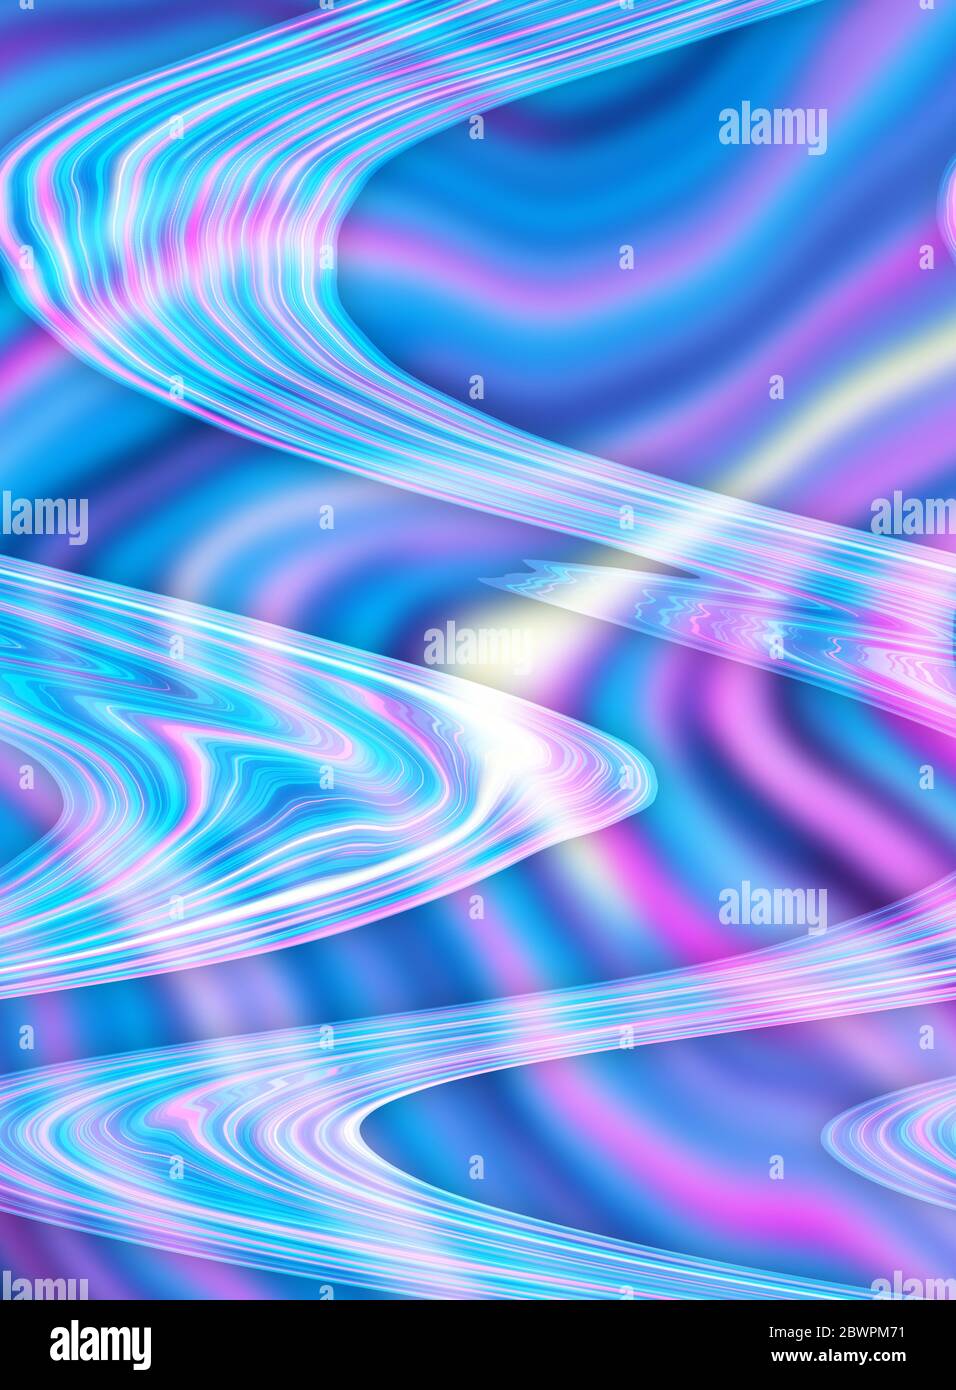 Fantasy color creative wallpaper, holographic metal foil texture background. Stock Photo